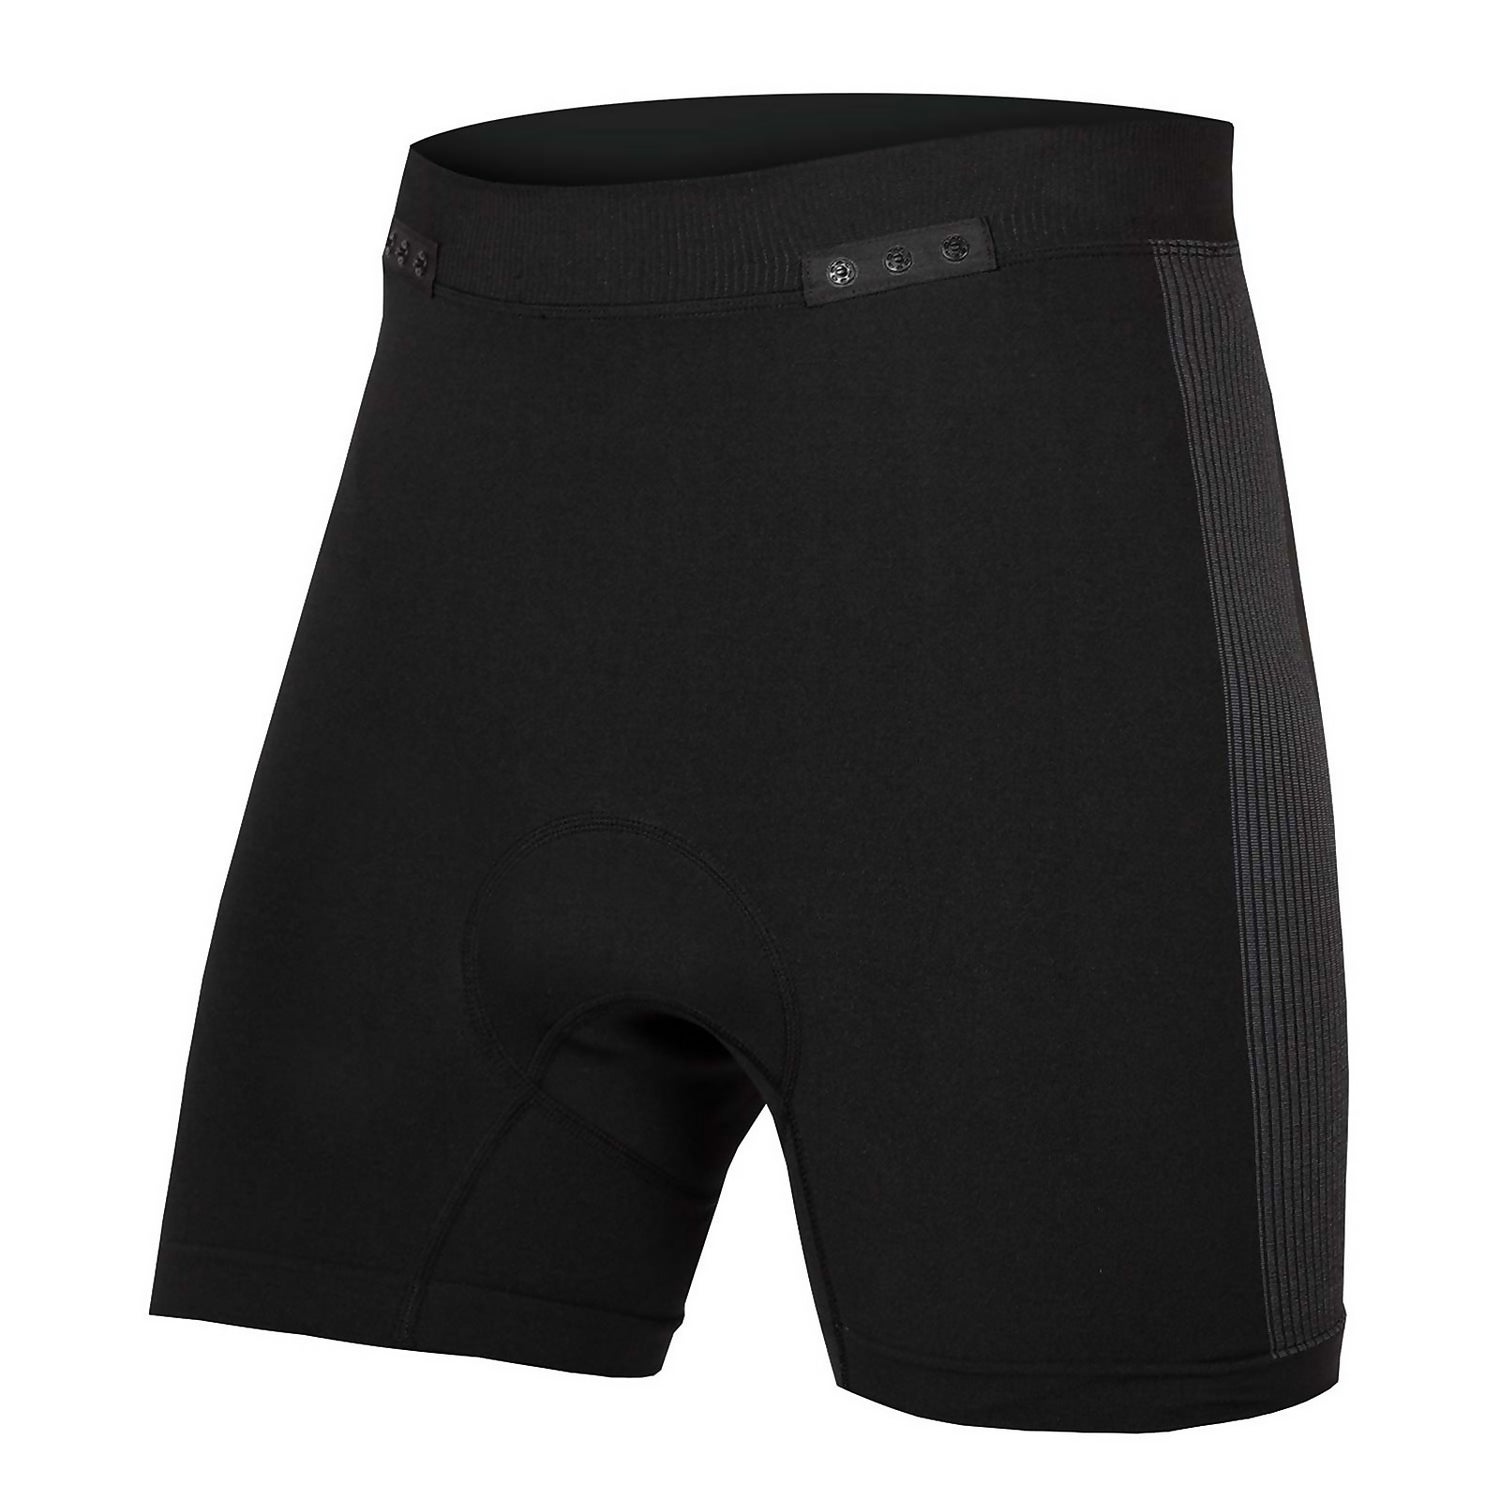 Men's Engineered Padded Boxer with Clickfast - Black - L